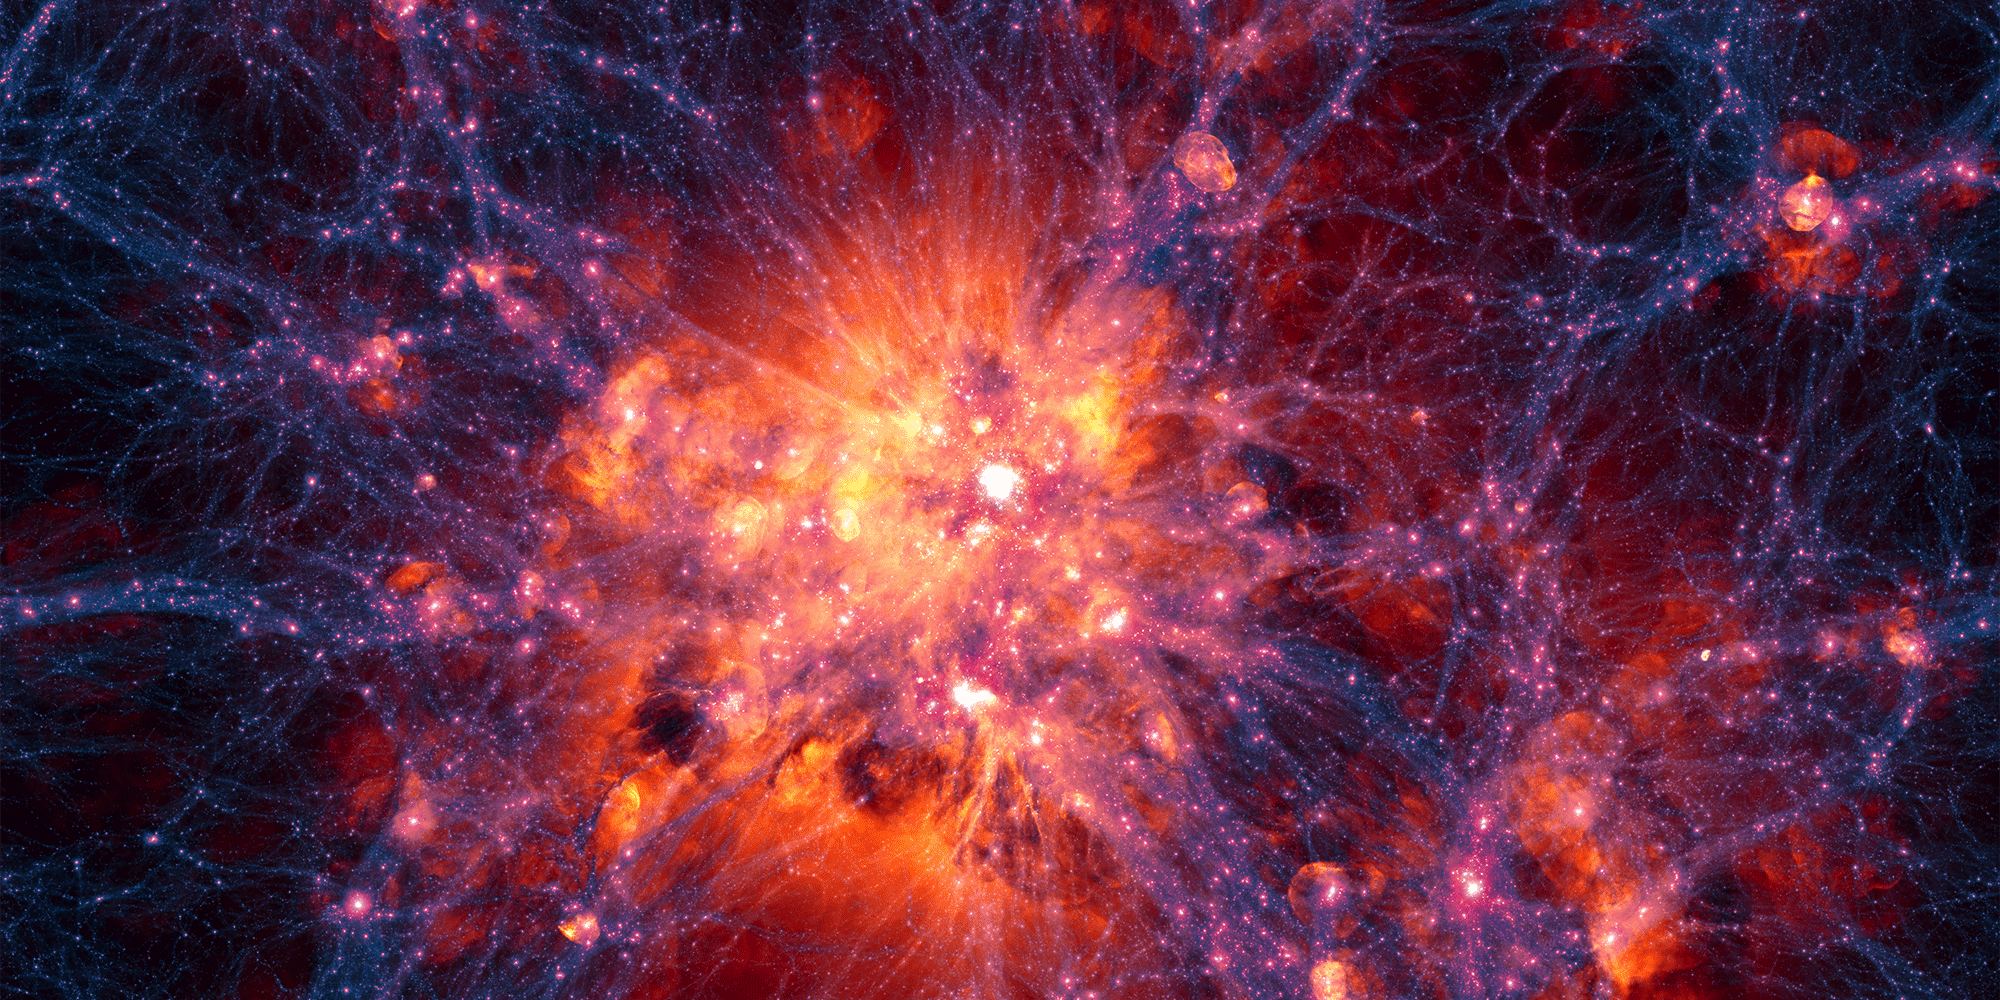 Illustration of what Dark Matter might look like